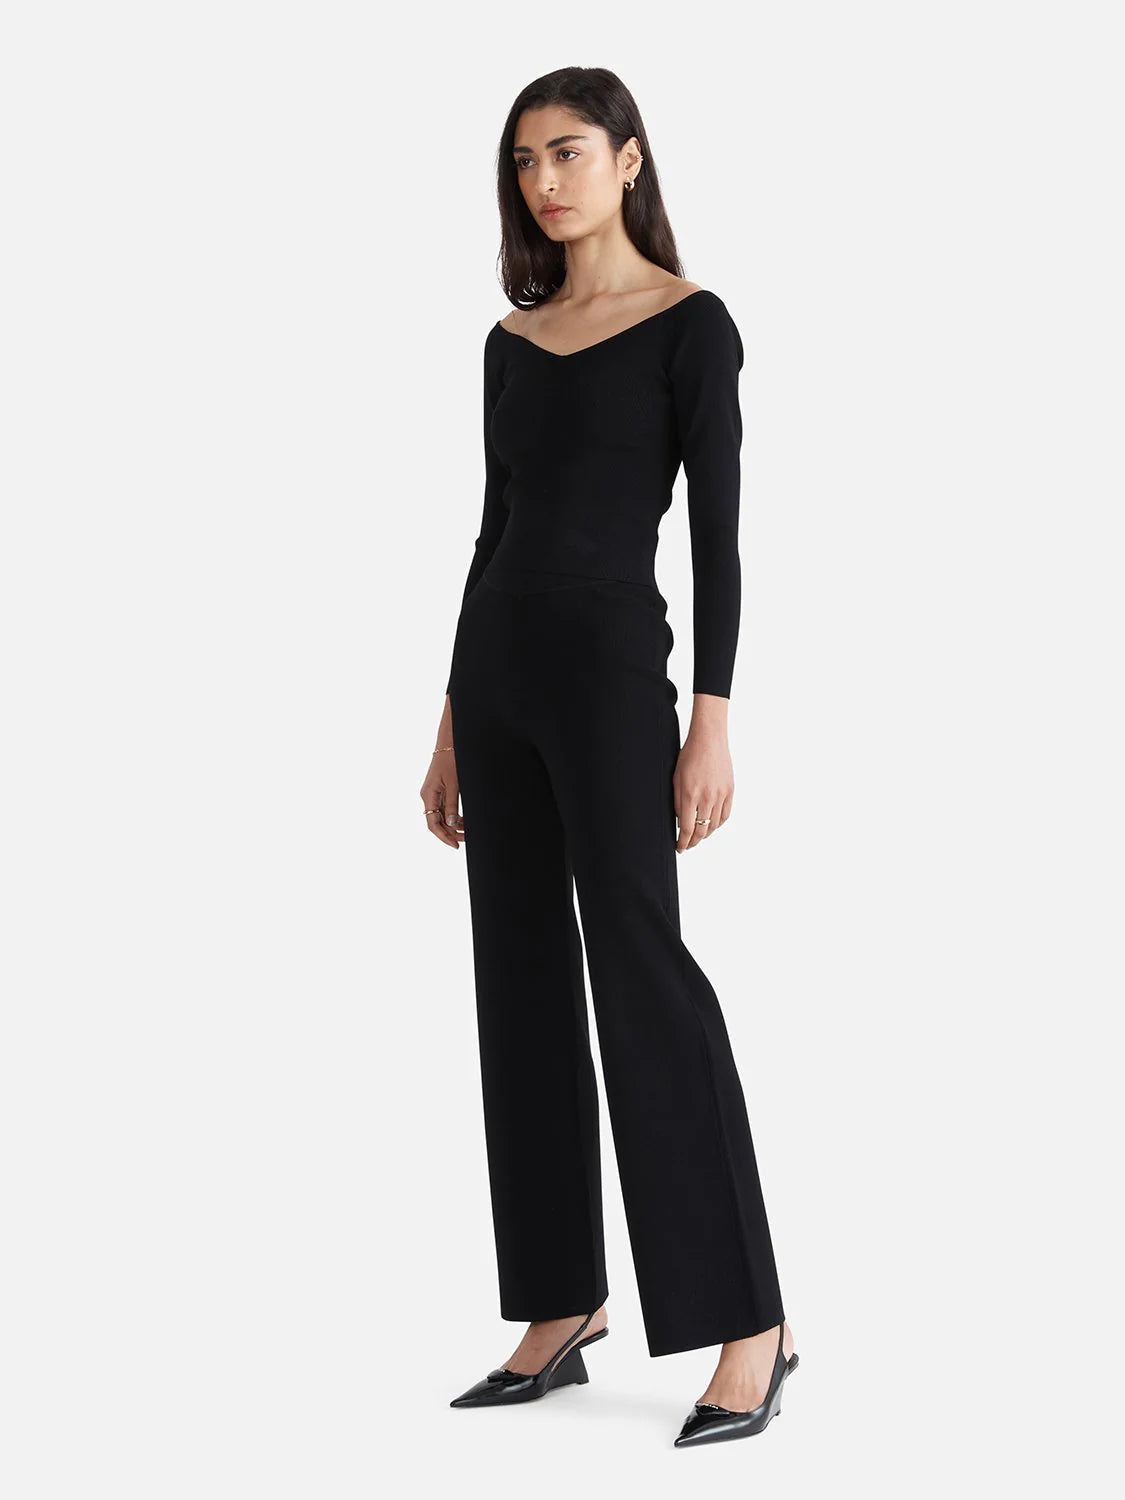 EVIE LUXE KNIT PANT